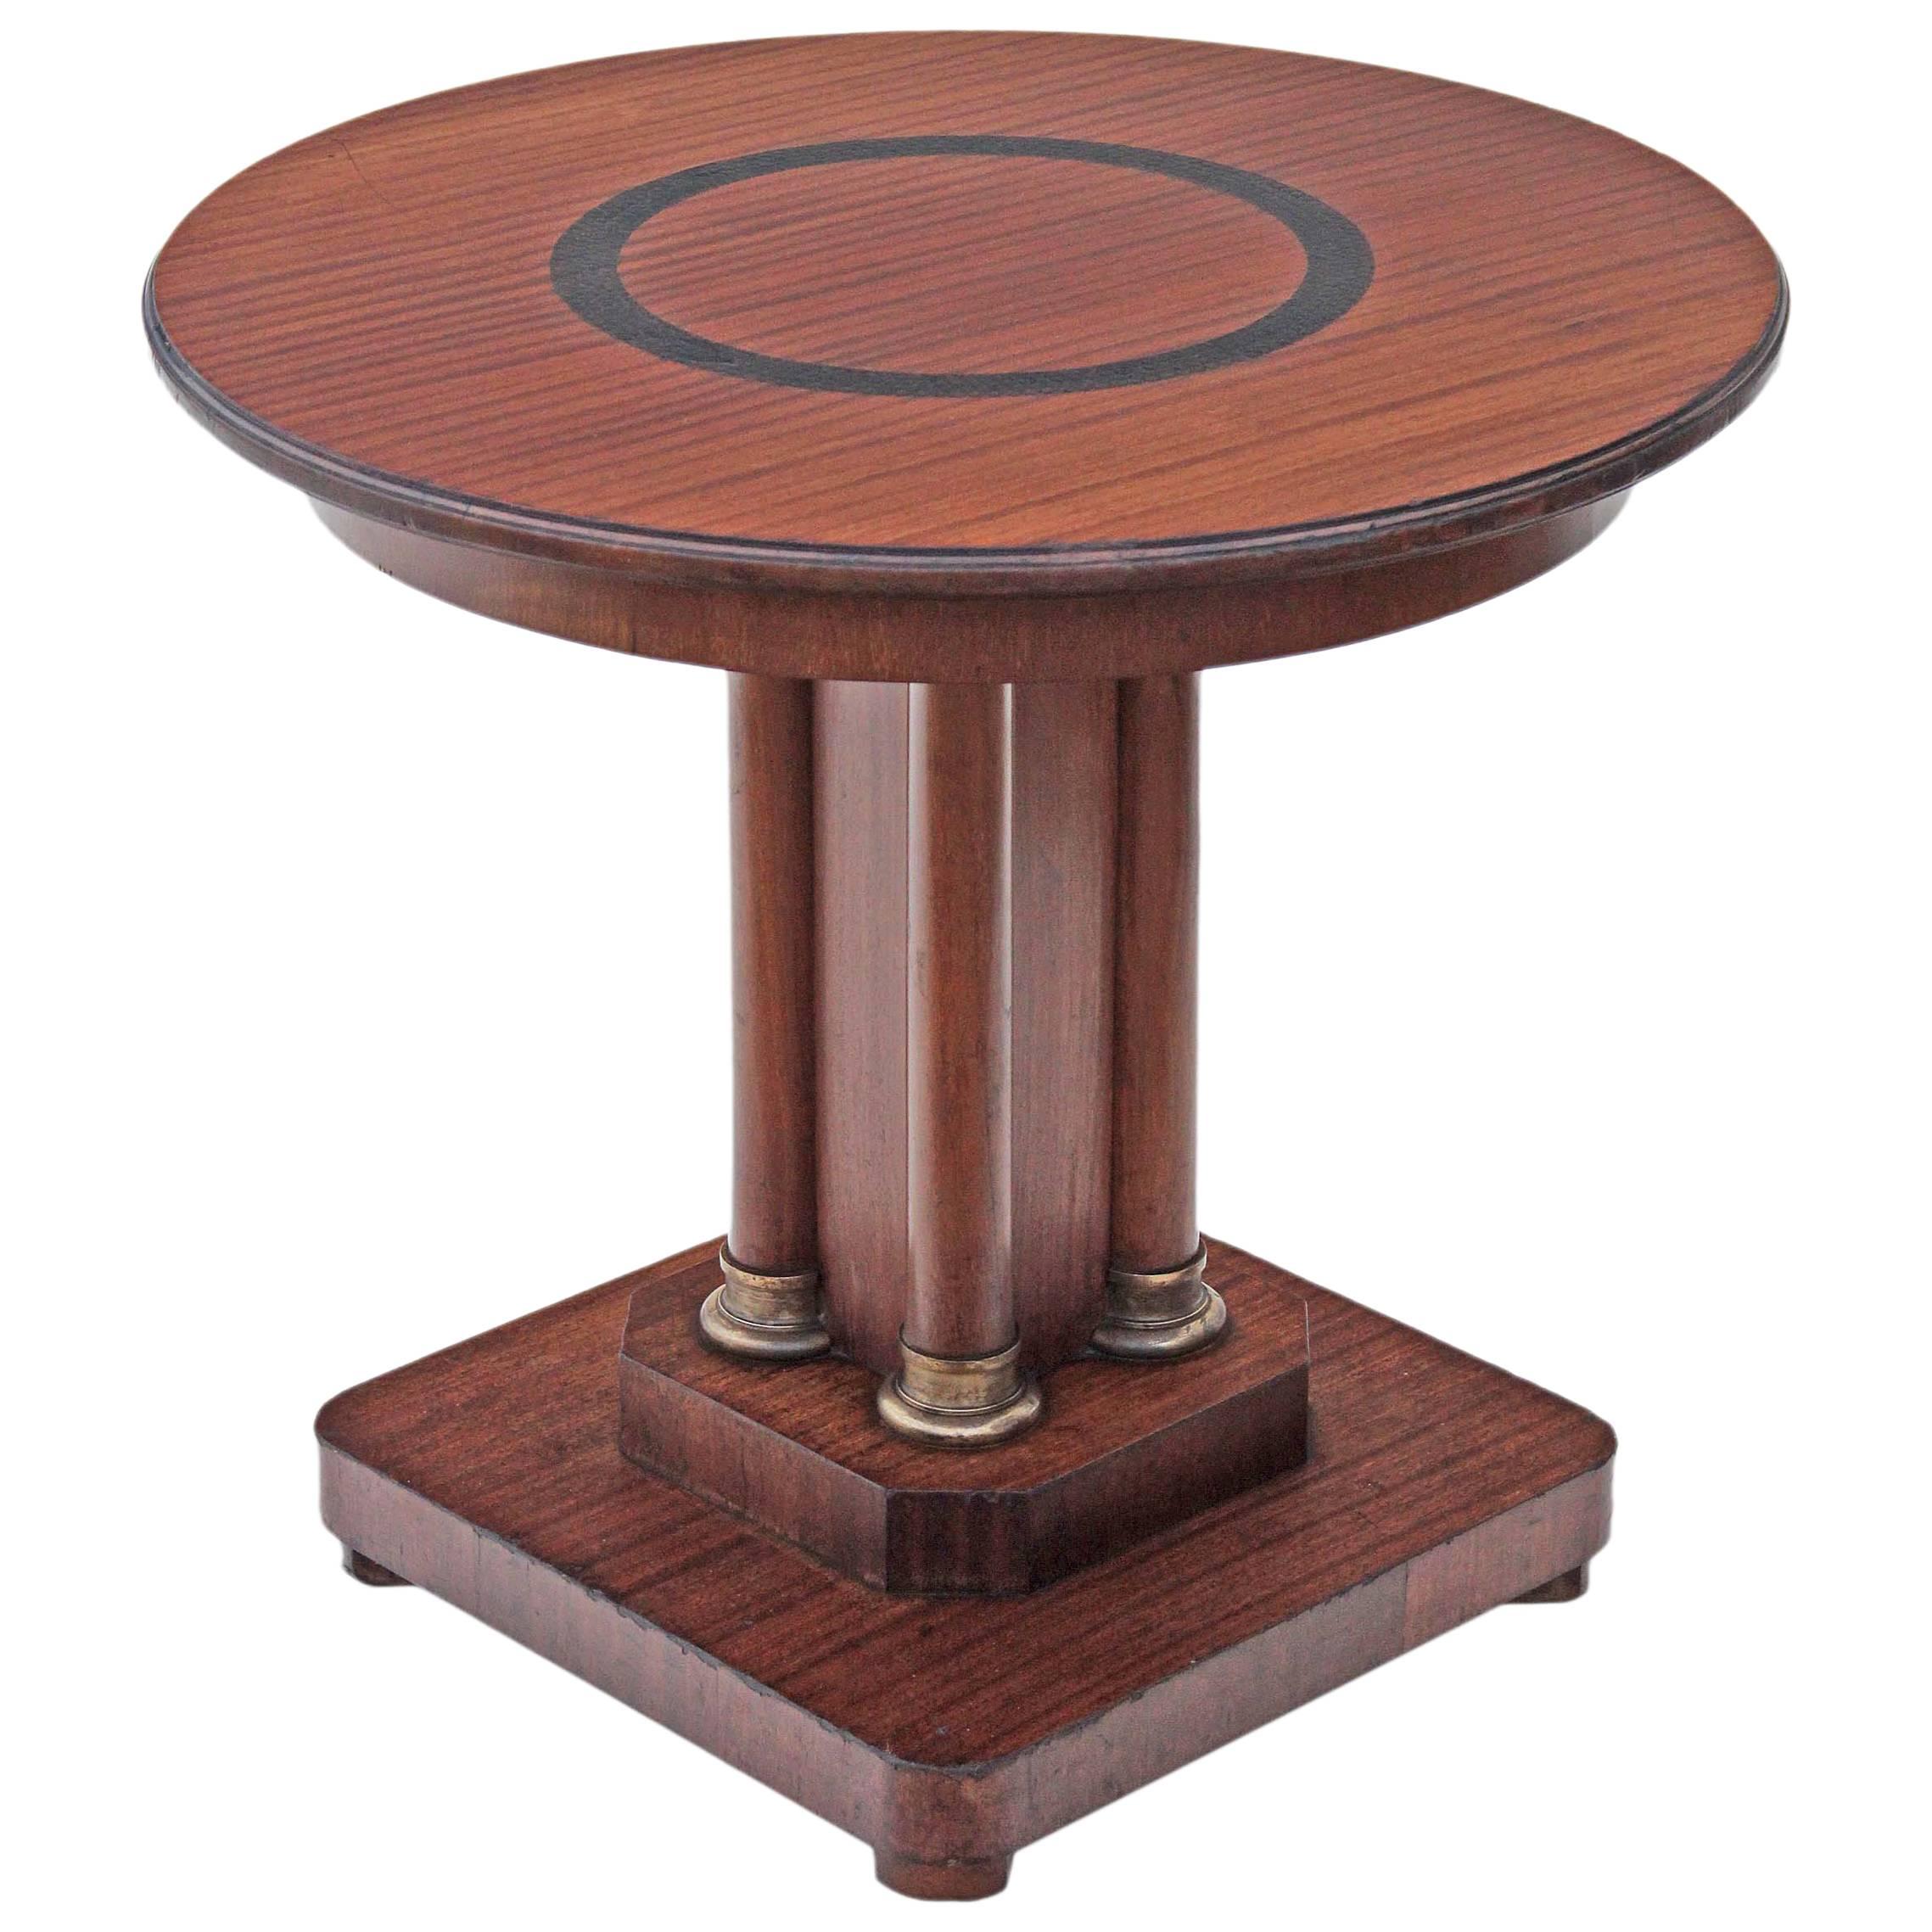 Art Deco 20th Century Mahogany Centre Window Side Lamp Supper Table Pedestal For Sale